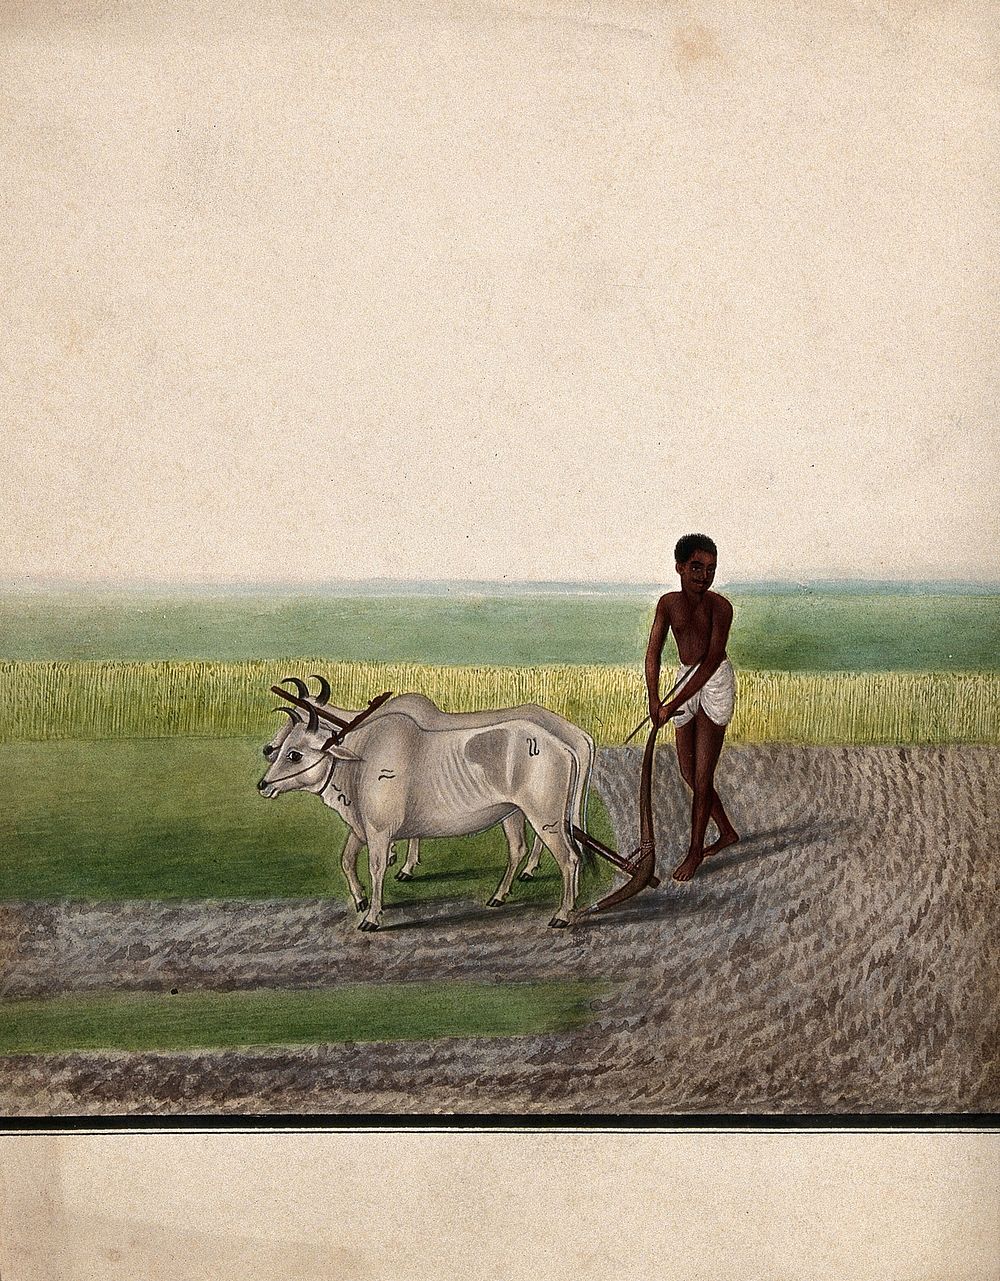 A man ploughing land with oxen. Watercolour by an Indian artist.